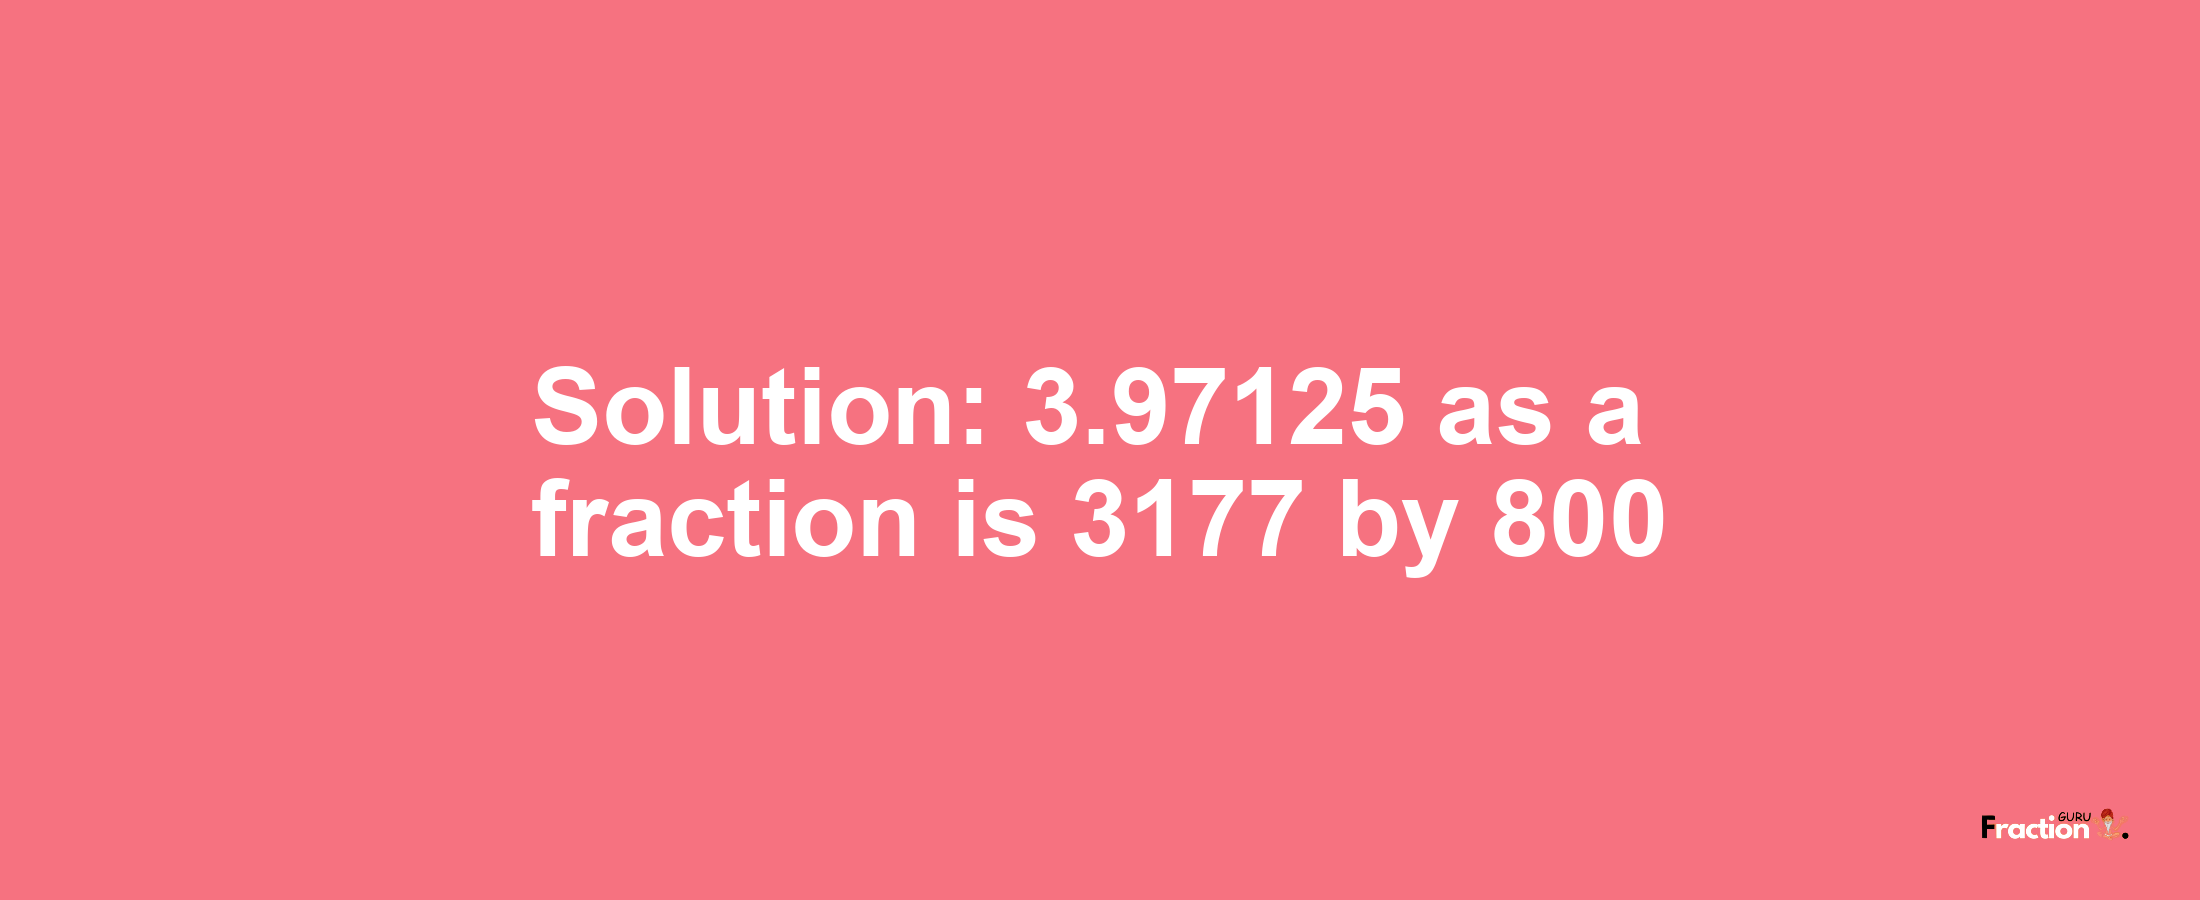 Solution:3.97125 as a fraction is 3177/800